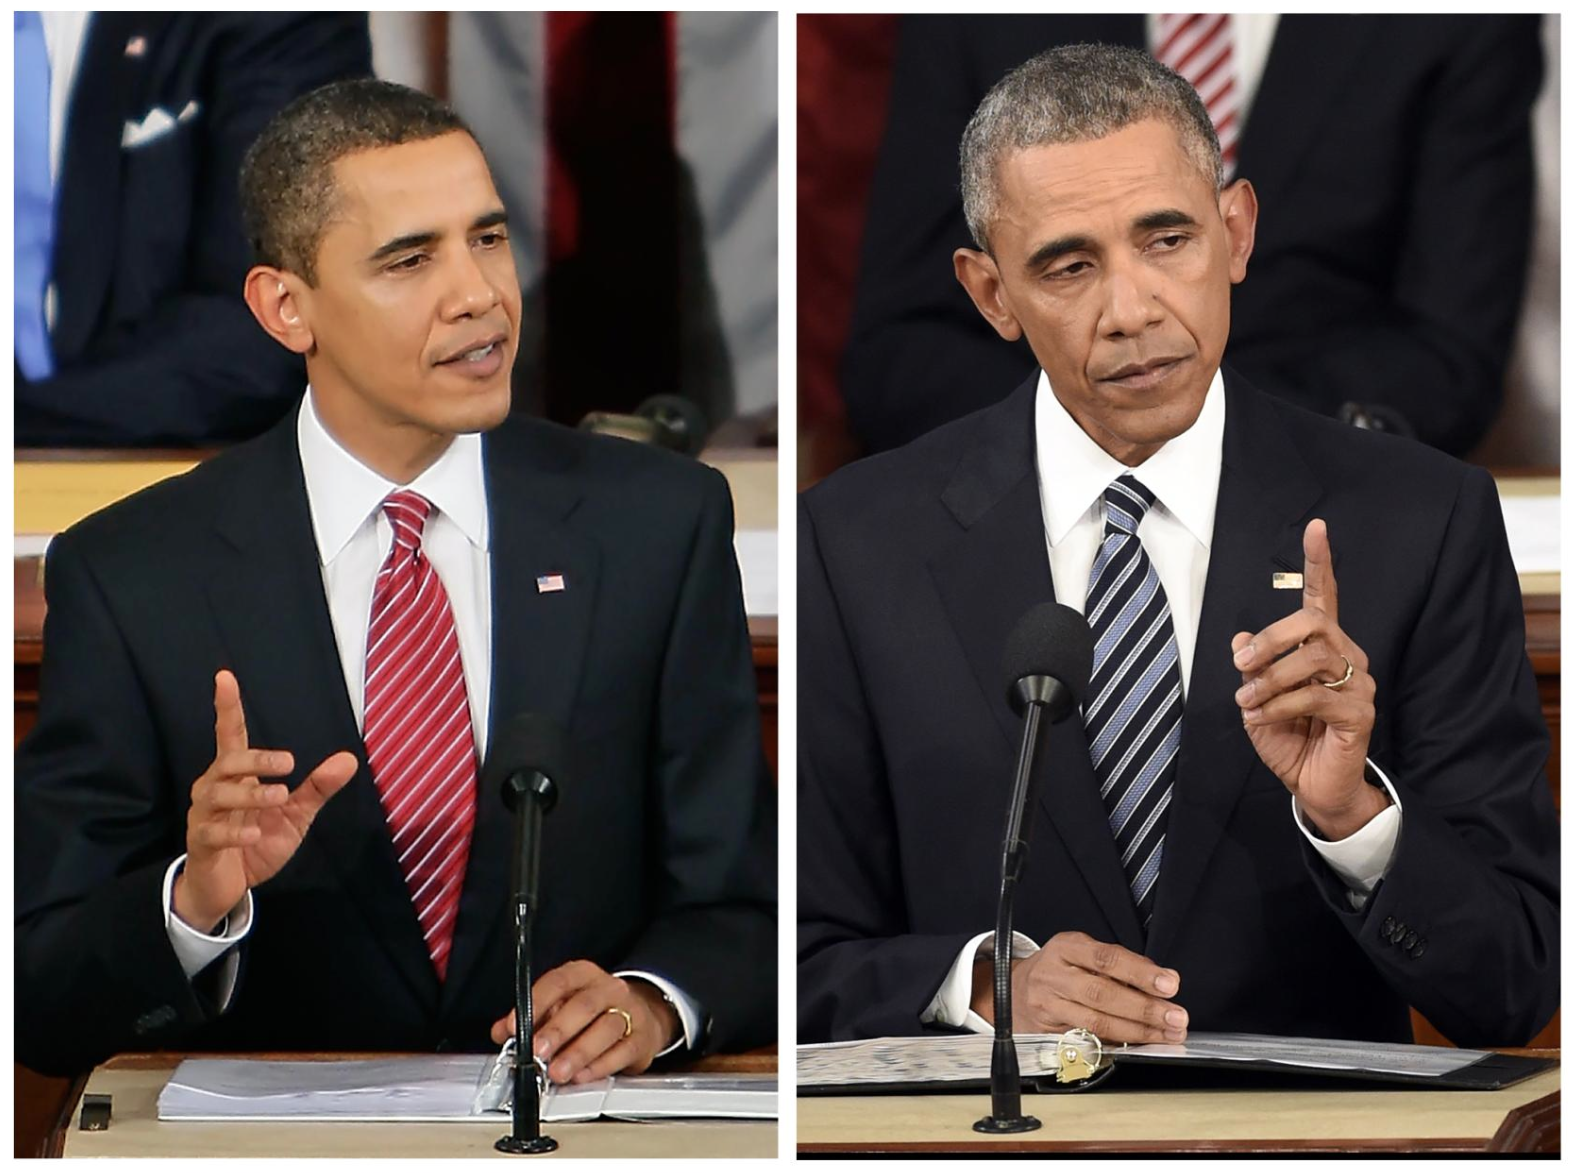 Obama's first and last SOTU